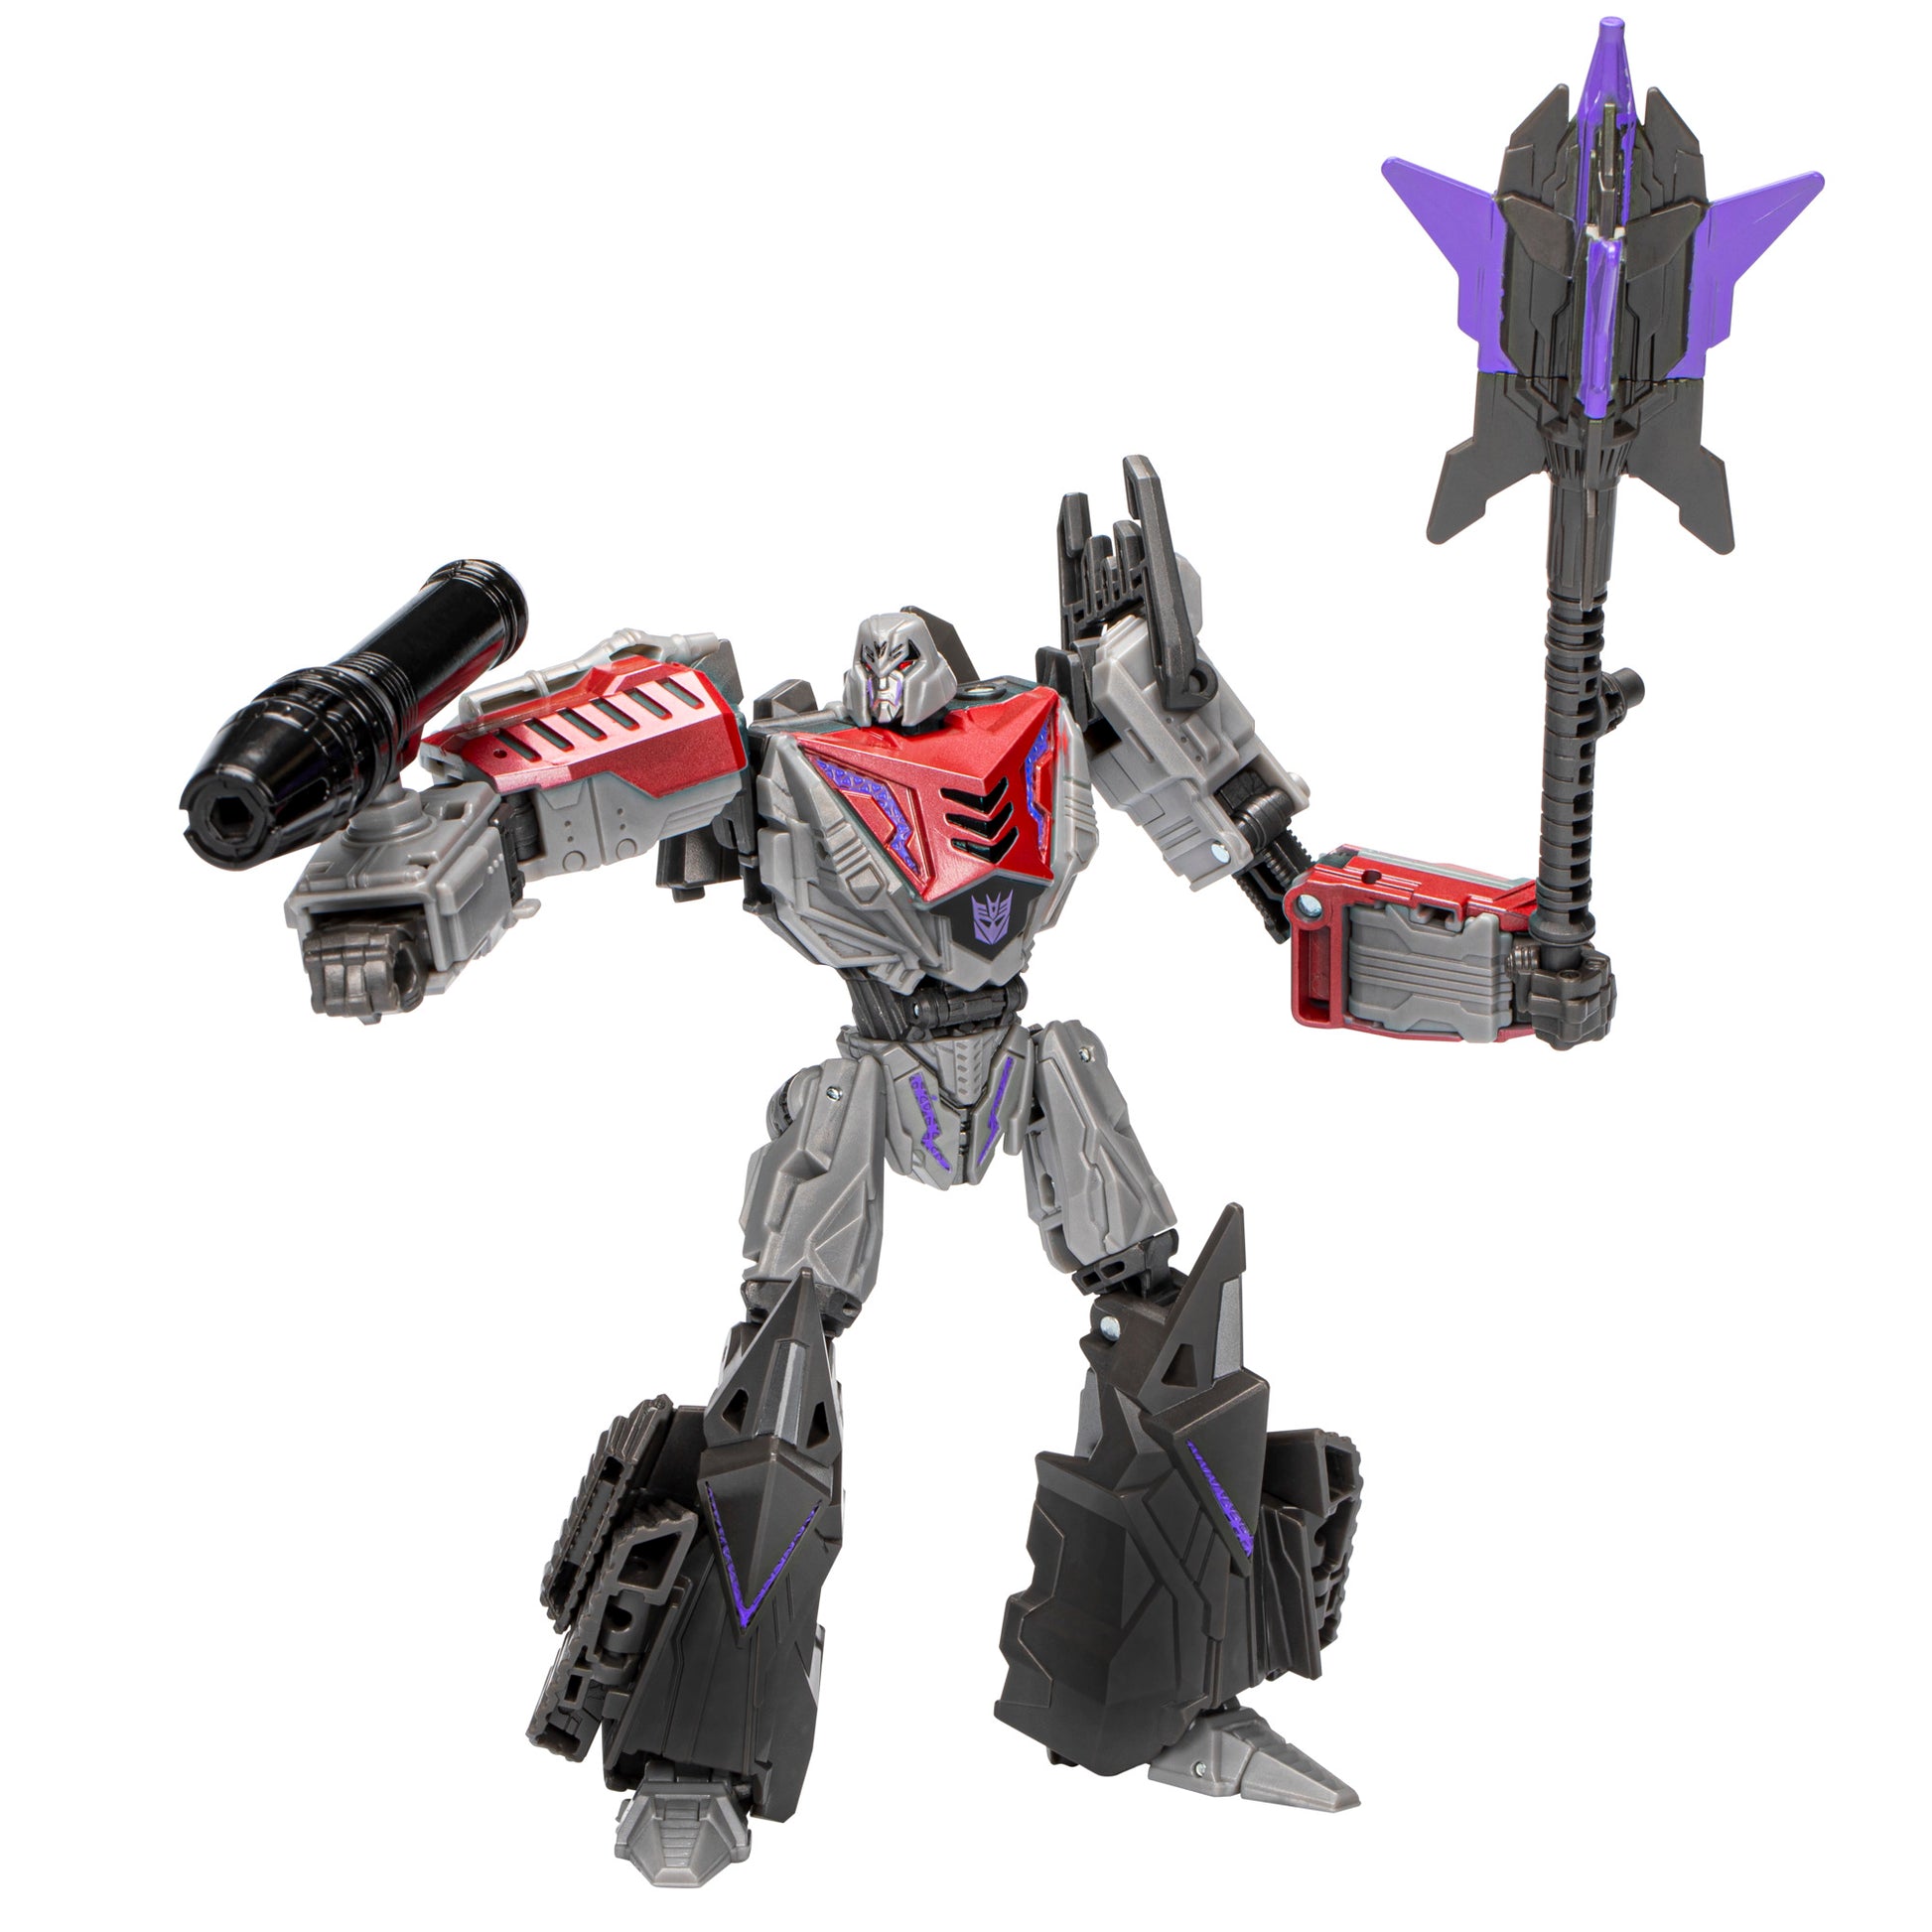 Transformers Studio Series Voyager 04 Gamer Edition Megatron Action Figure Toy - Heretoserveyou